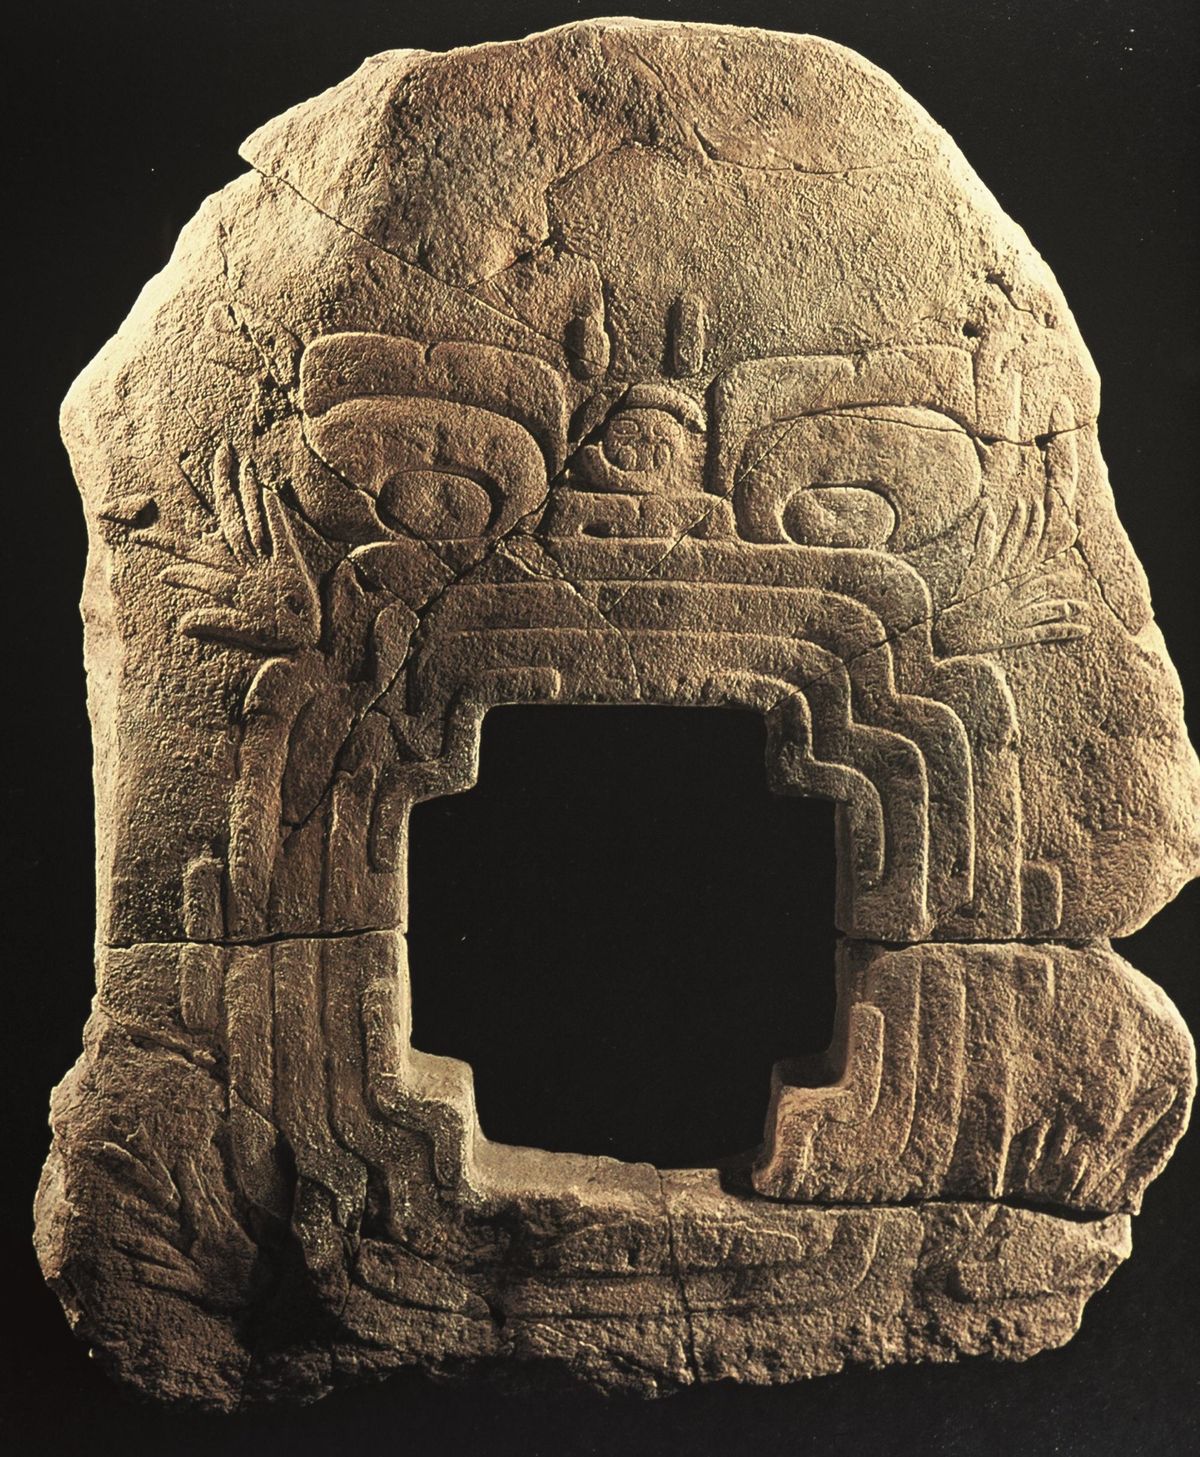 The carved sculpture is believed to be from Chalcatzingo, a large archeological site in Mexico. Photo by Kent Reilly III. Courtesy Mario Córdova, via Instituto Nacional de Antropología e Historia (INAH)